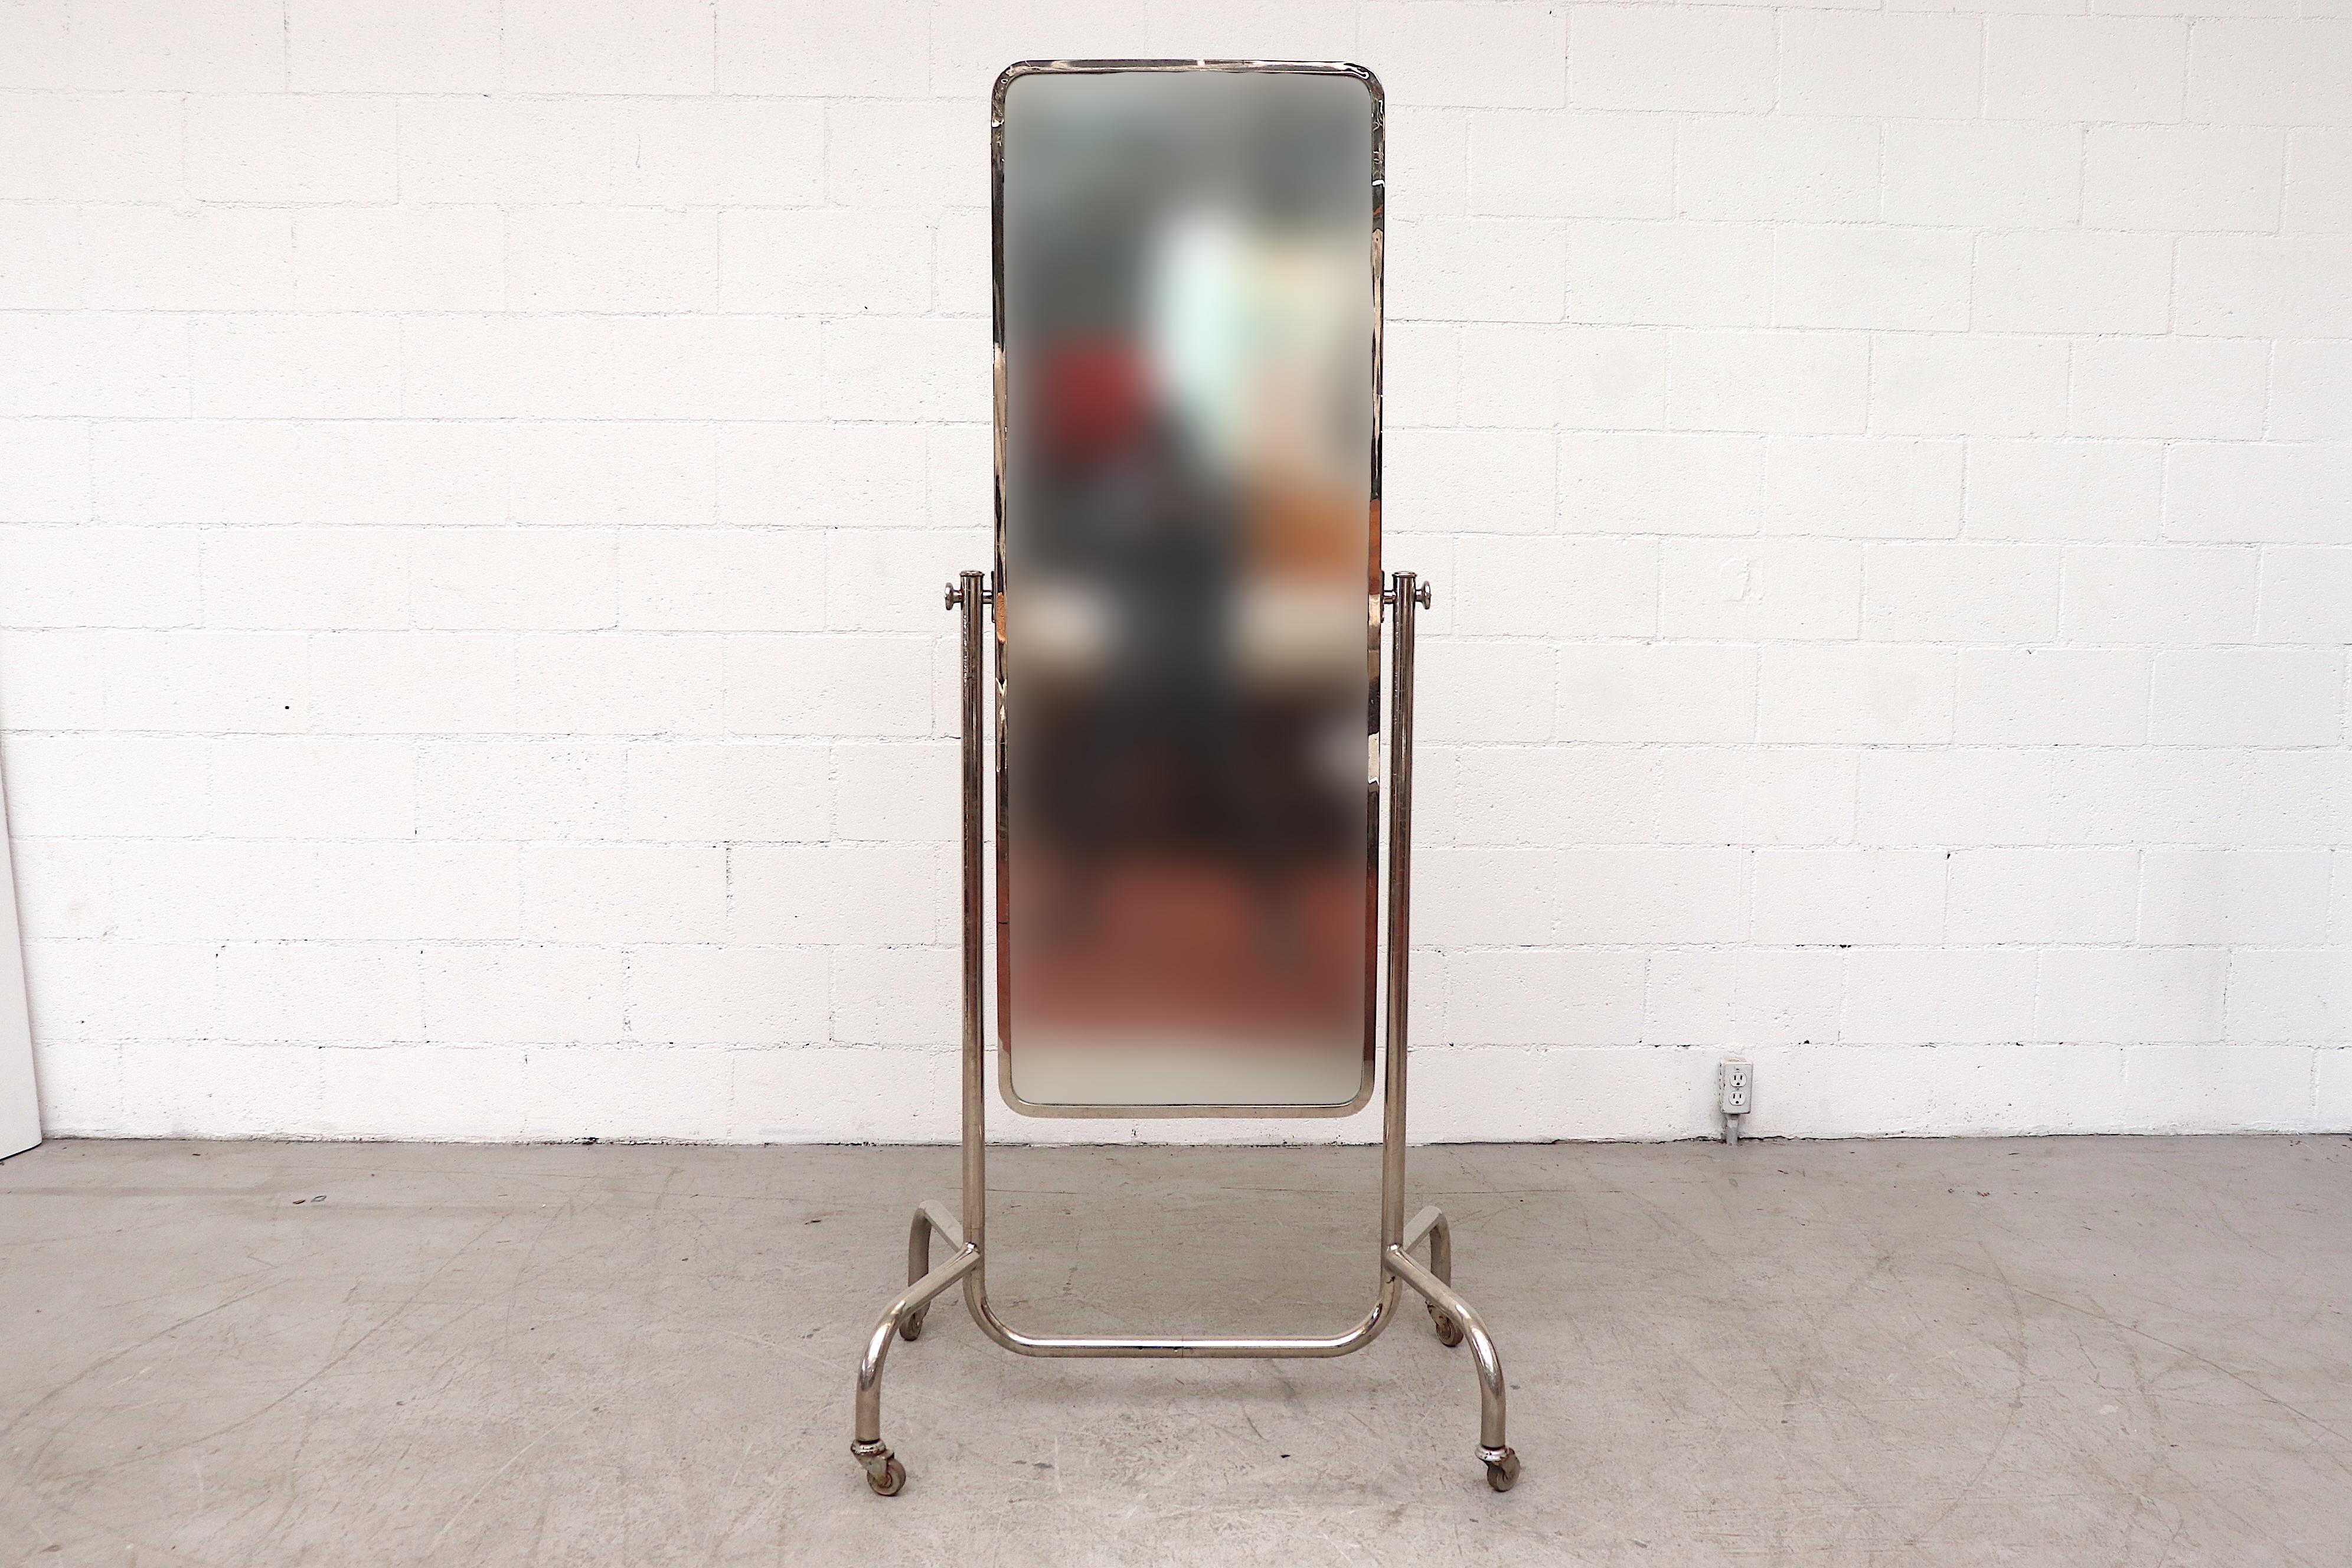 Rare mid-century full-length rolling mirror with chrome tubular frame. In very original condition with original tag and visible mirror wear and oxidation. Frame has noticeable patina consistent with age. Similar mirrors also available.